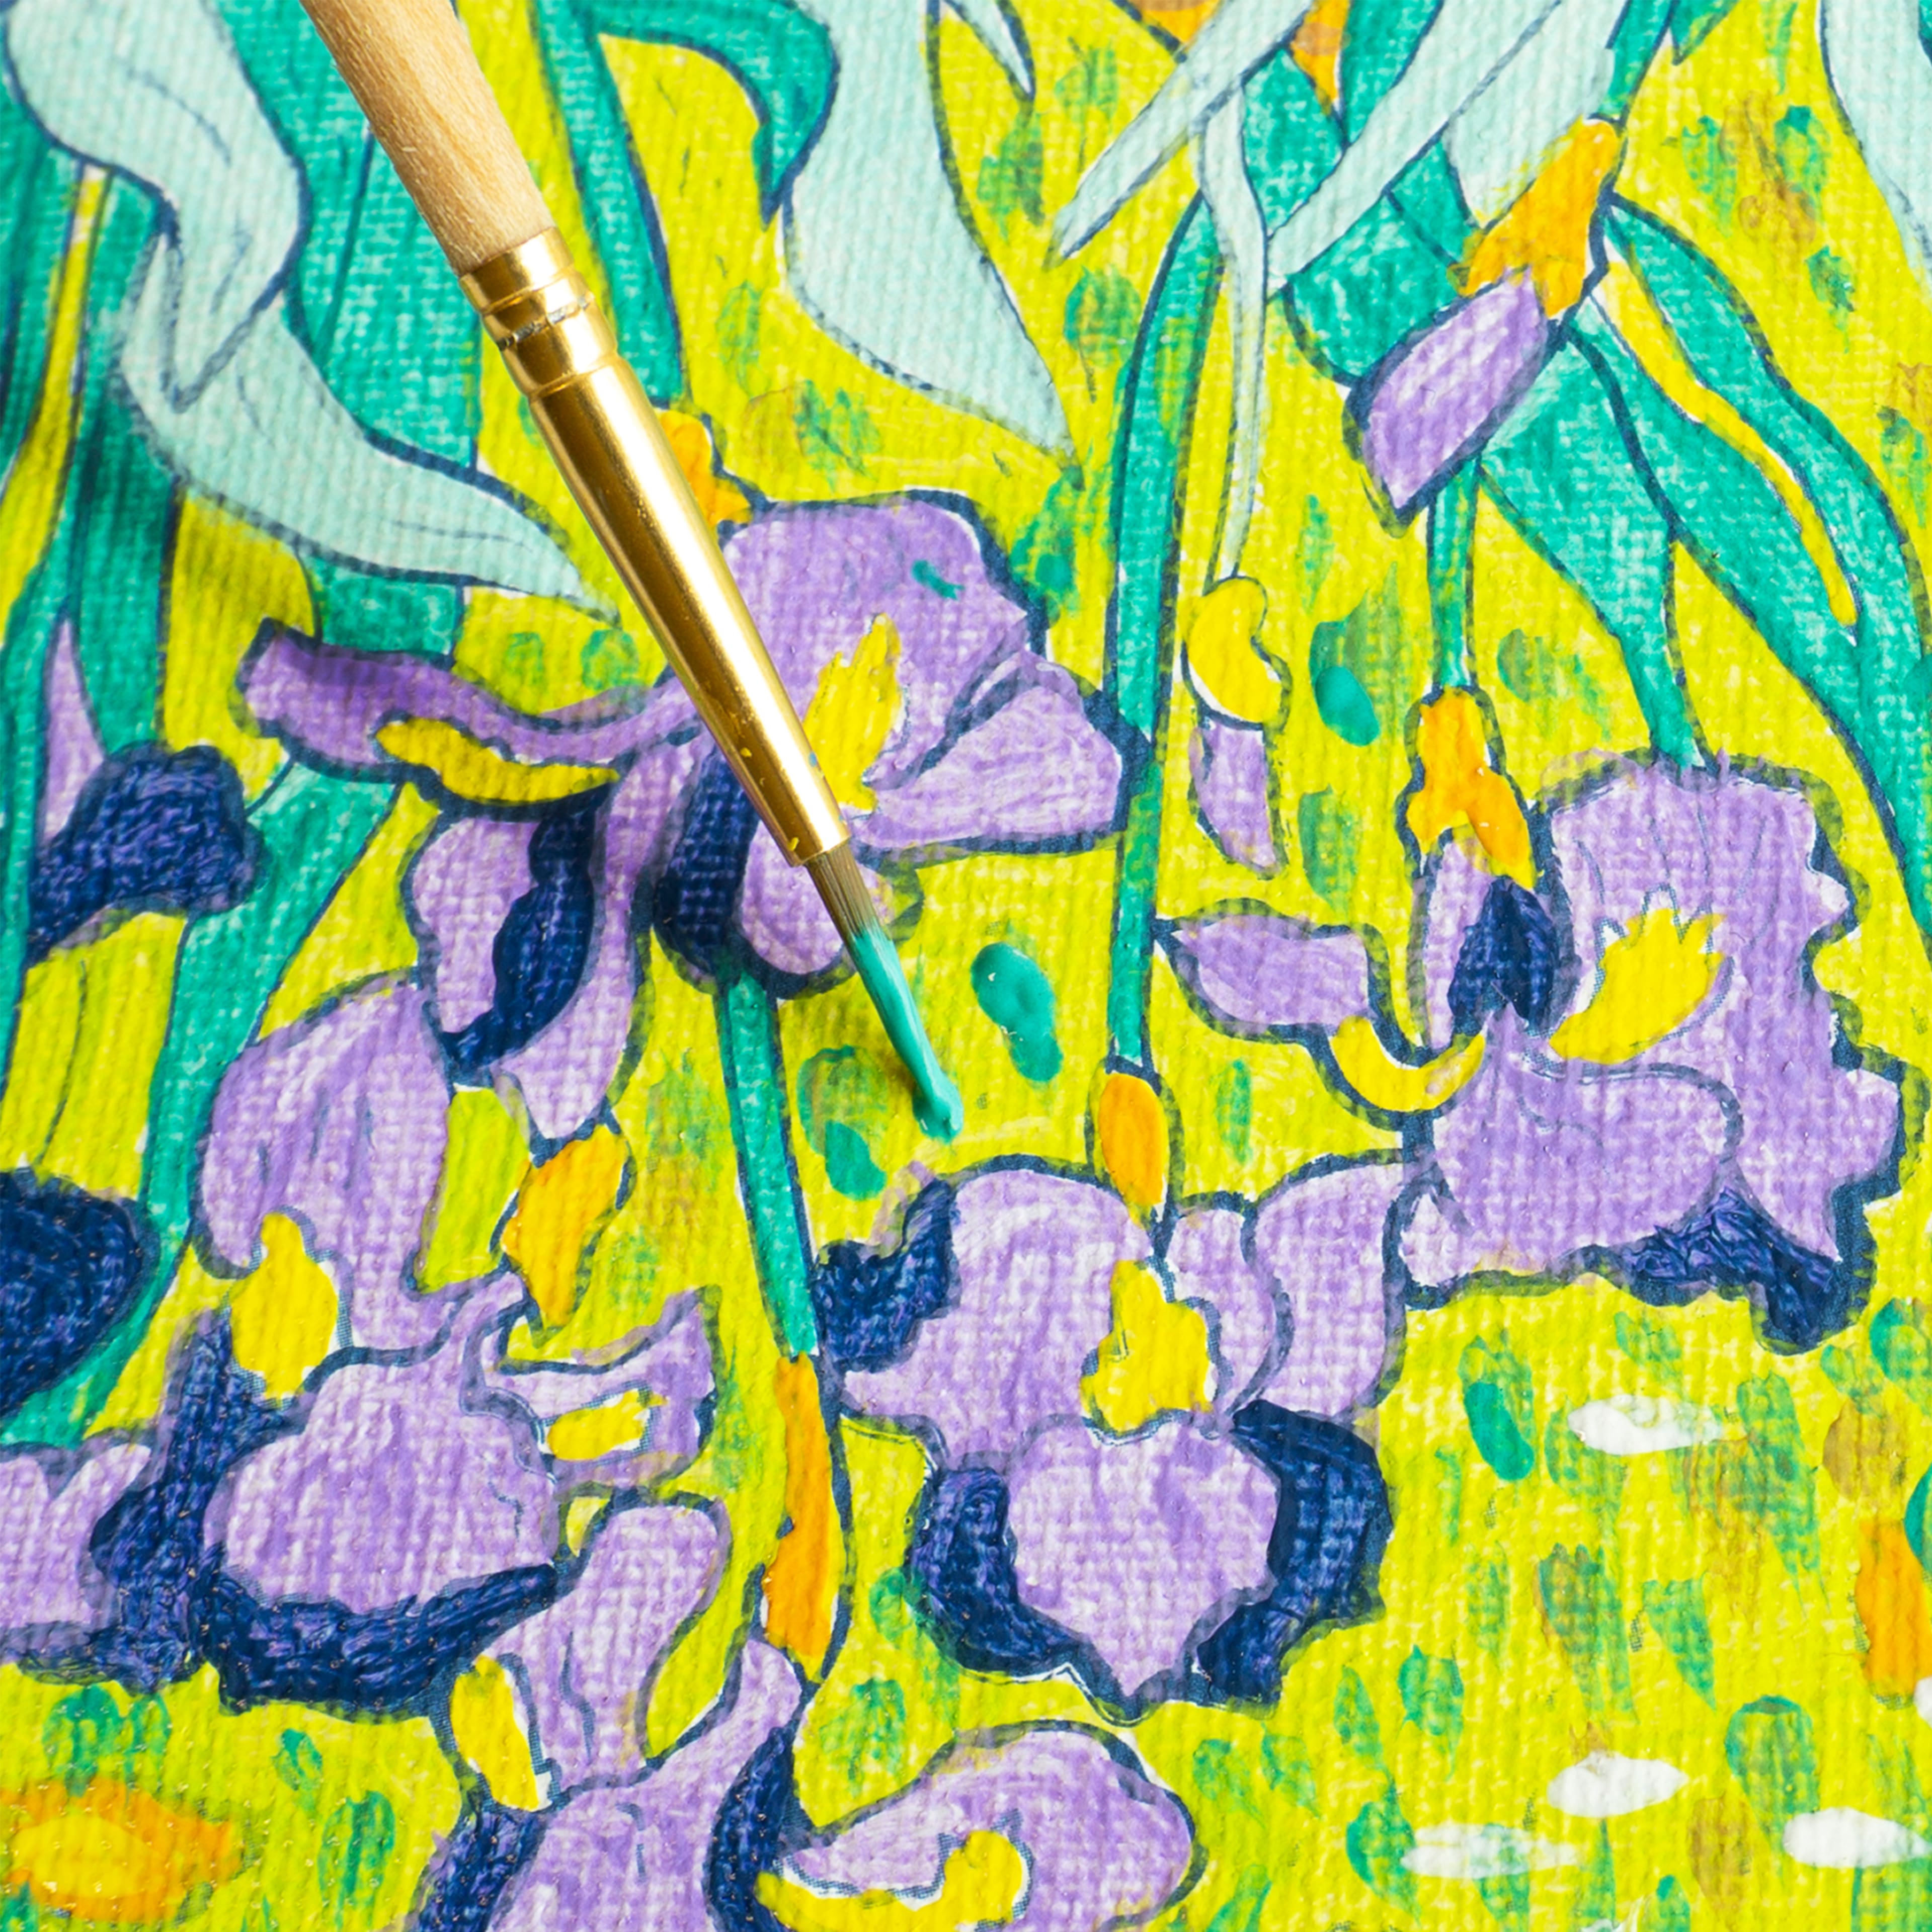 Faber-Castell Paint by Number Museum Series., Irises